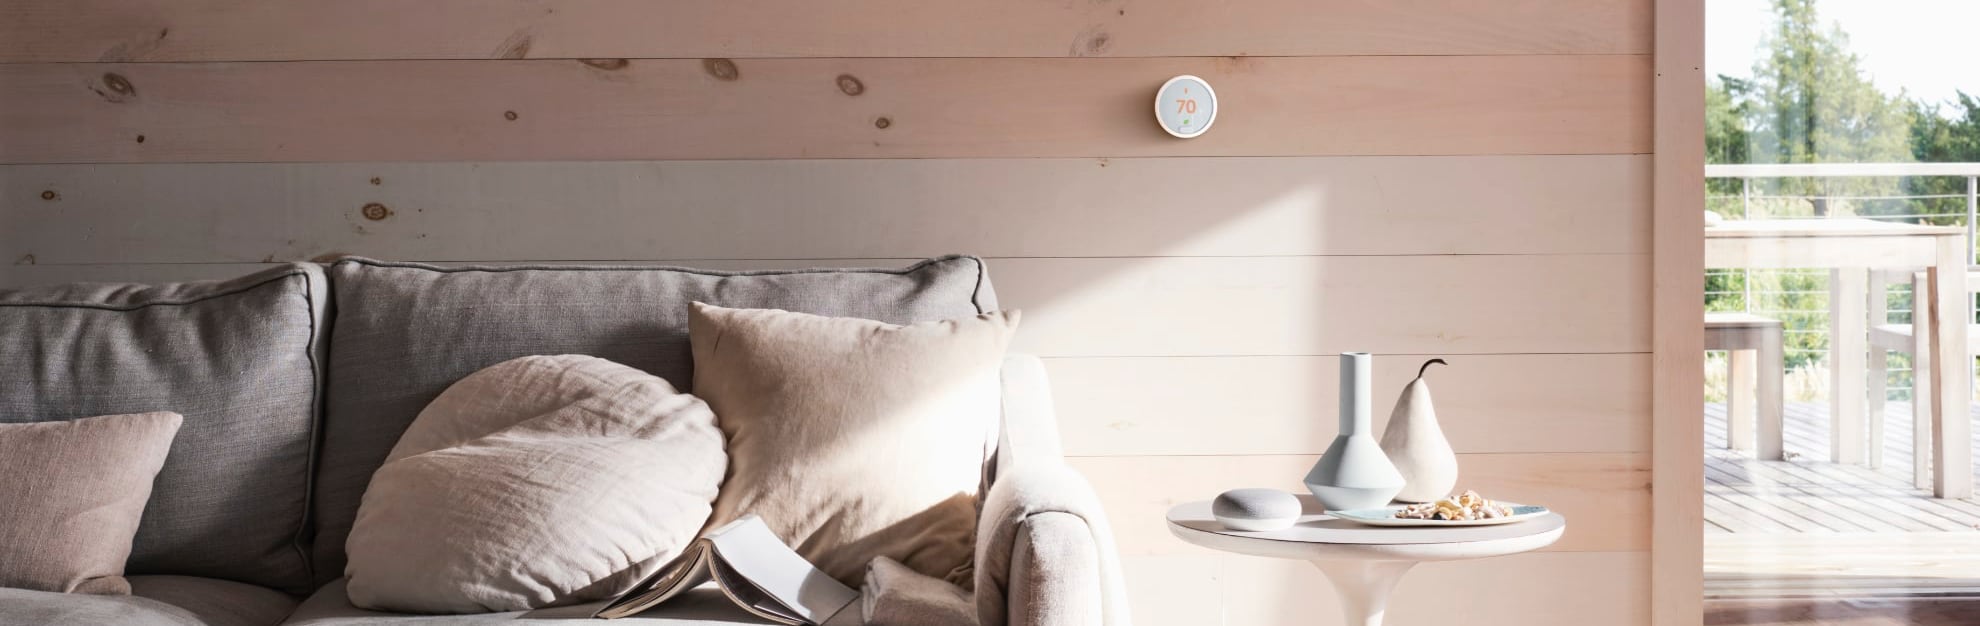 Vivint Home Automation in Ventura